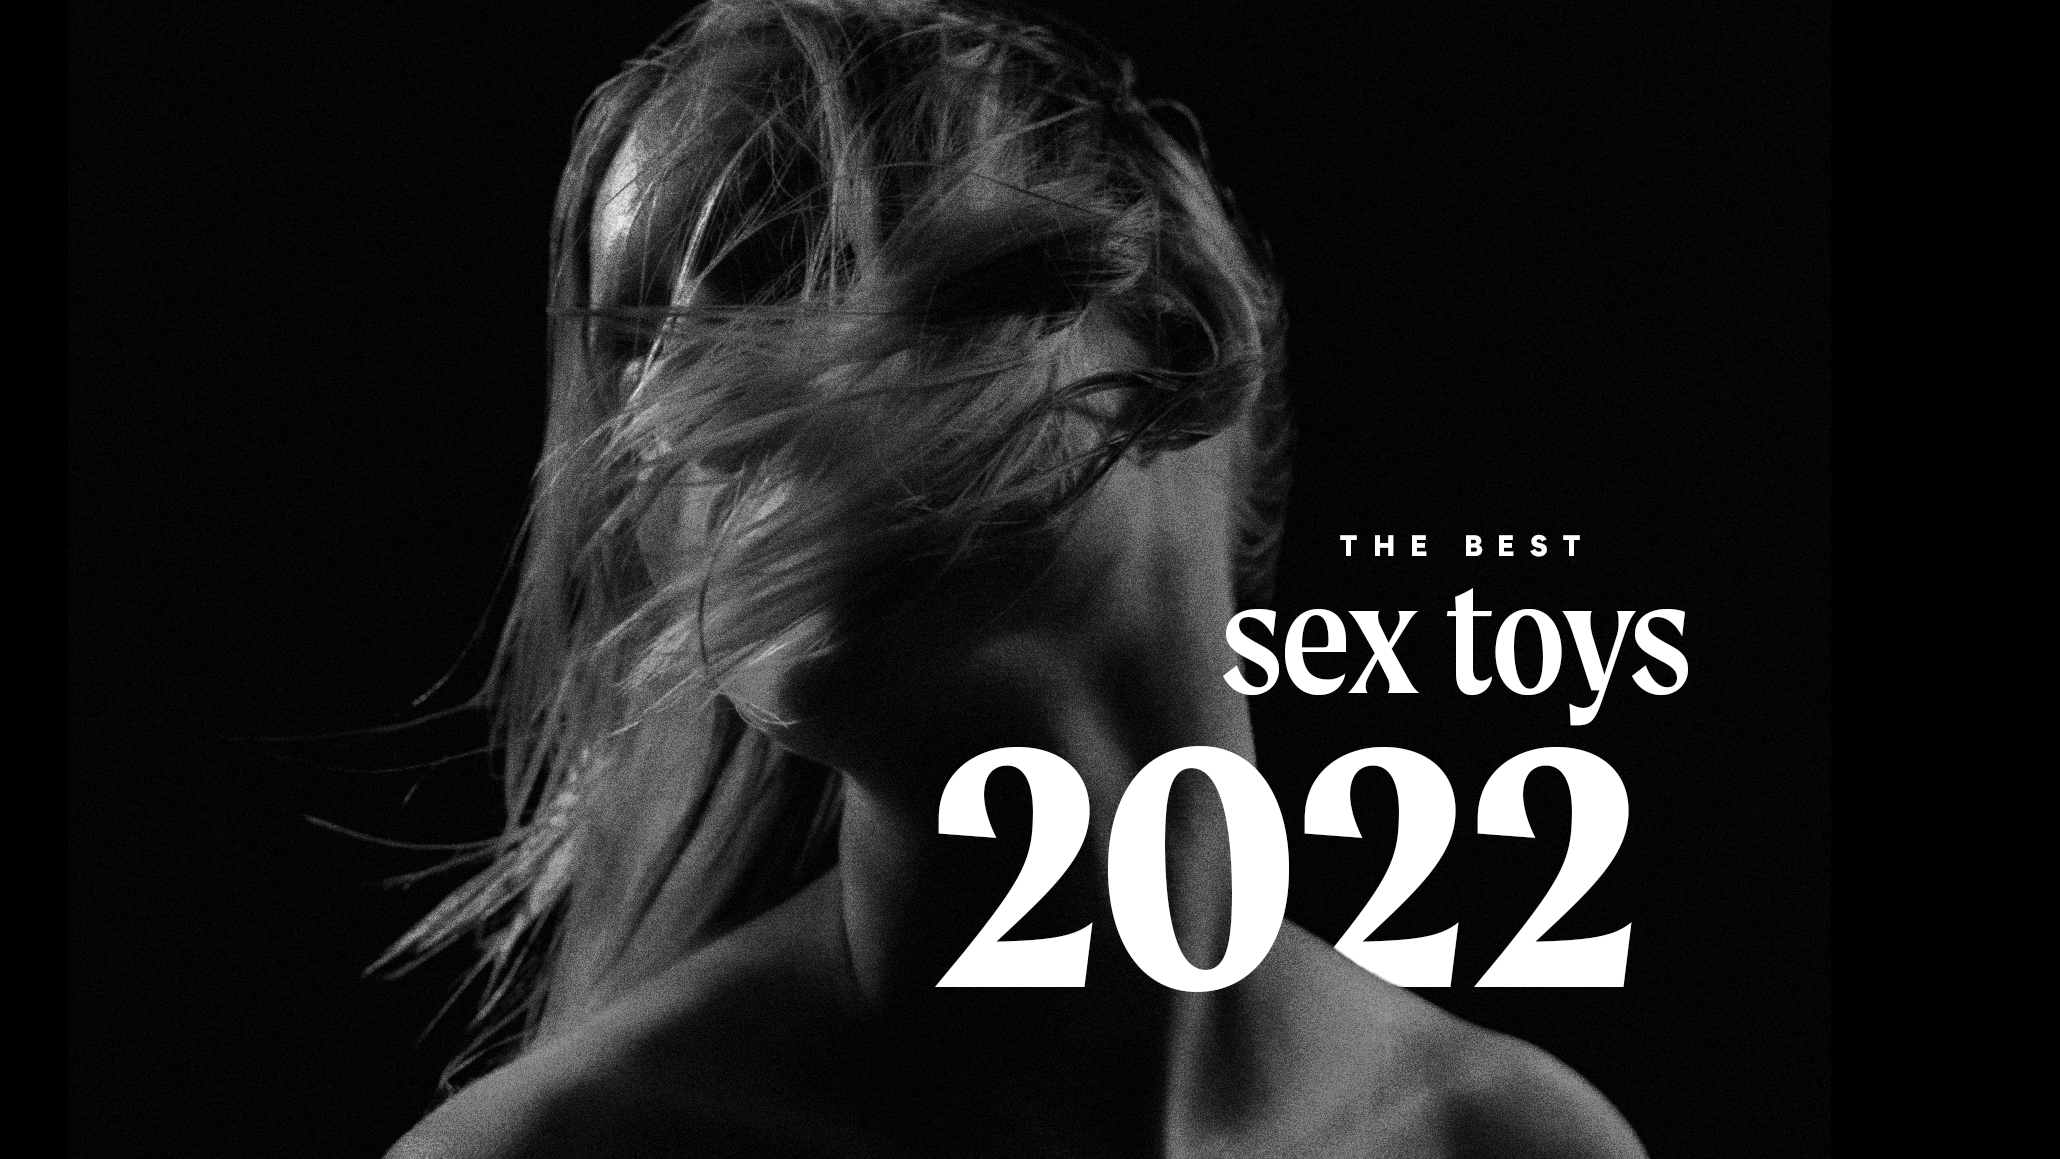 The Best Sex Toys of 2022 Are All About Innovation and Inclusion